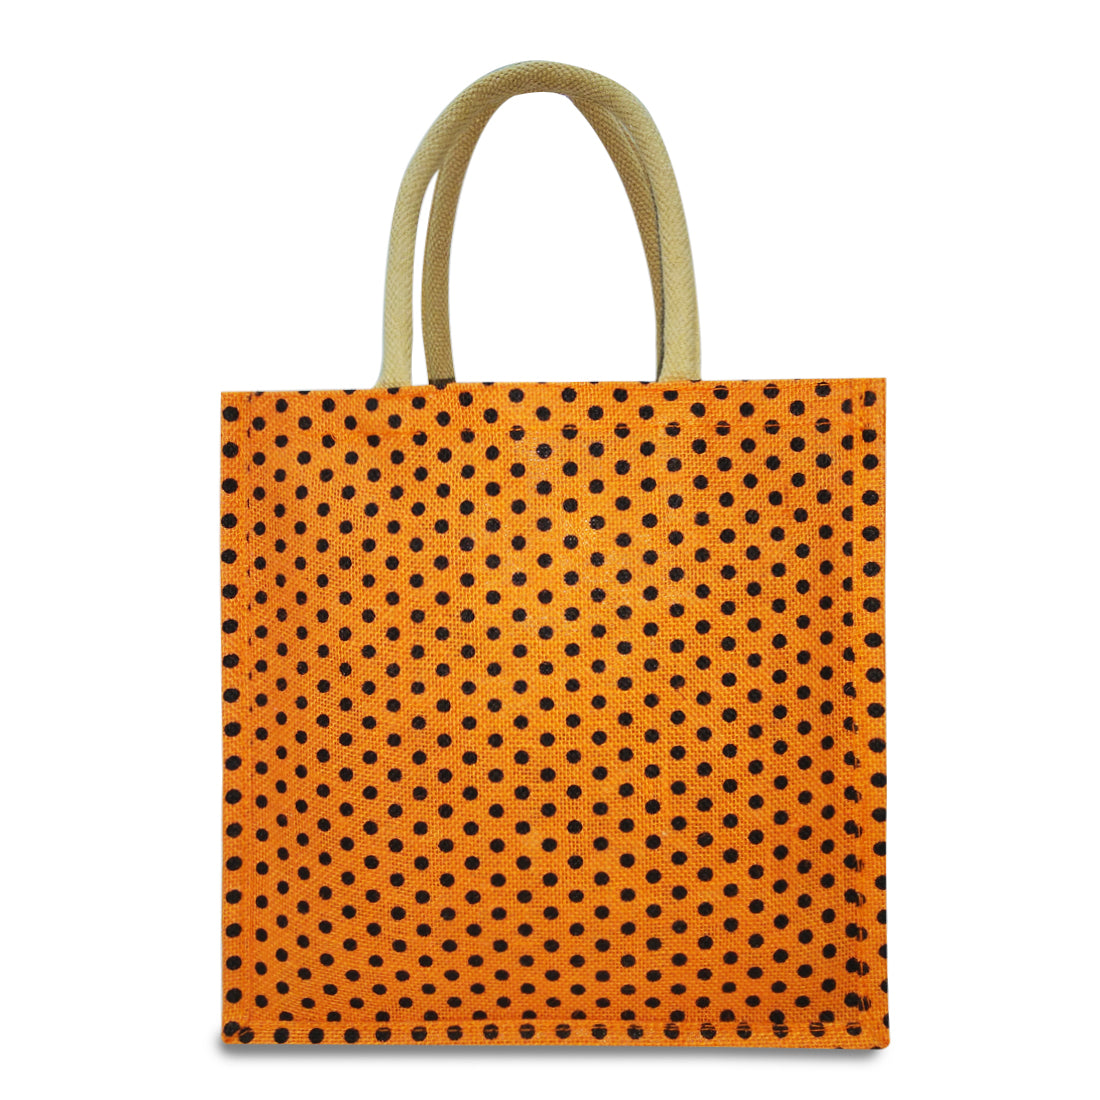 DOT COUTURE: POLKA DOT JUTE BAG FOR ECO-QUEENS